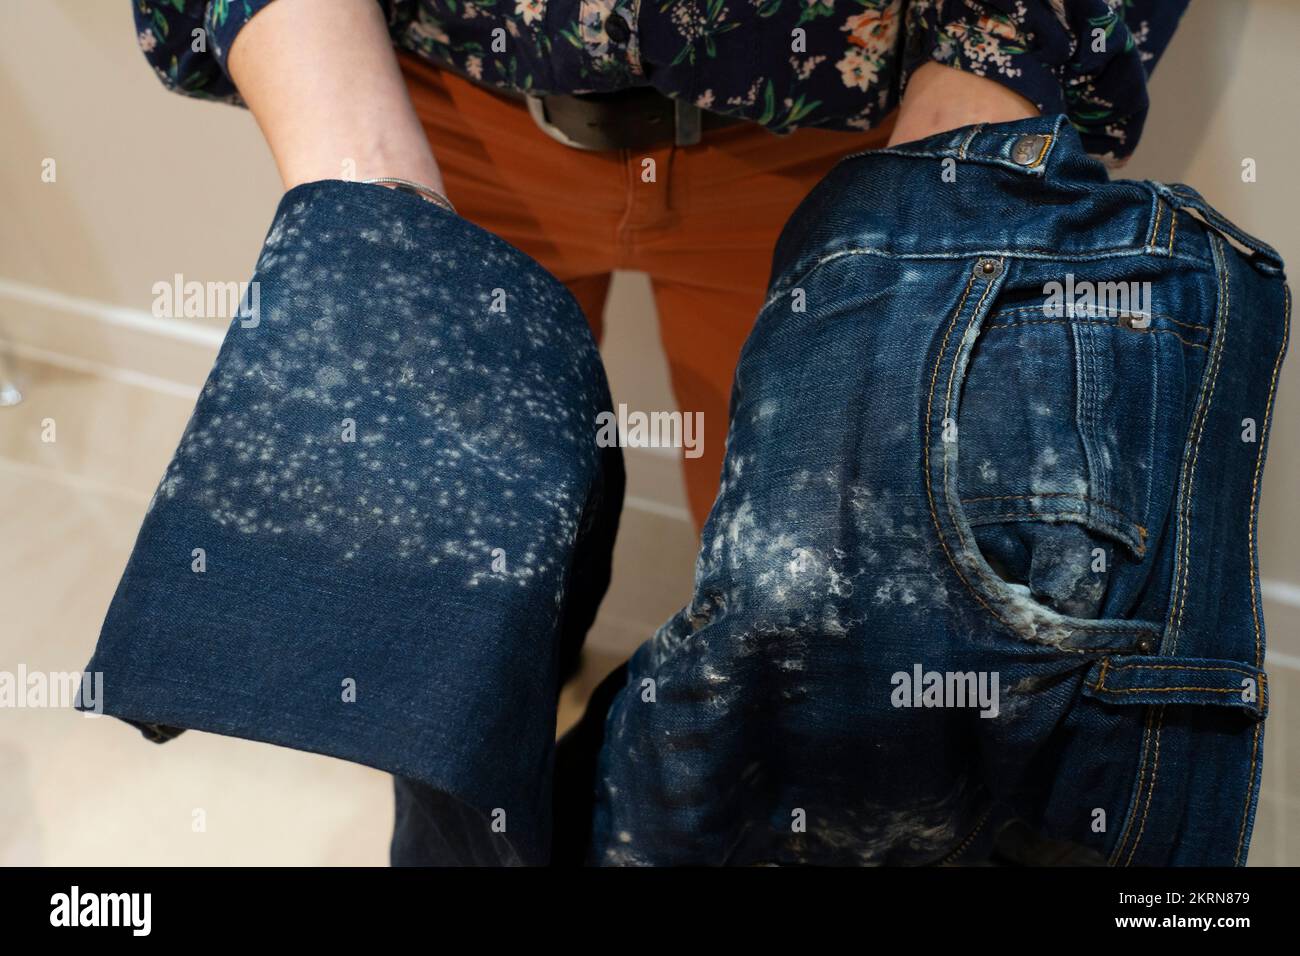 Woman holding a pair of jeans with white mould growing on them due to damp and condensation. Concept: rental problems in a UK flat, poor ventilation, Stock Photo